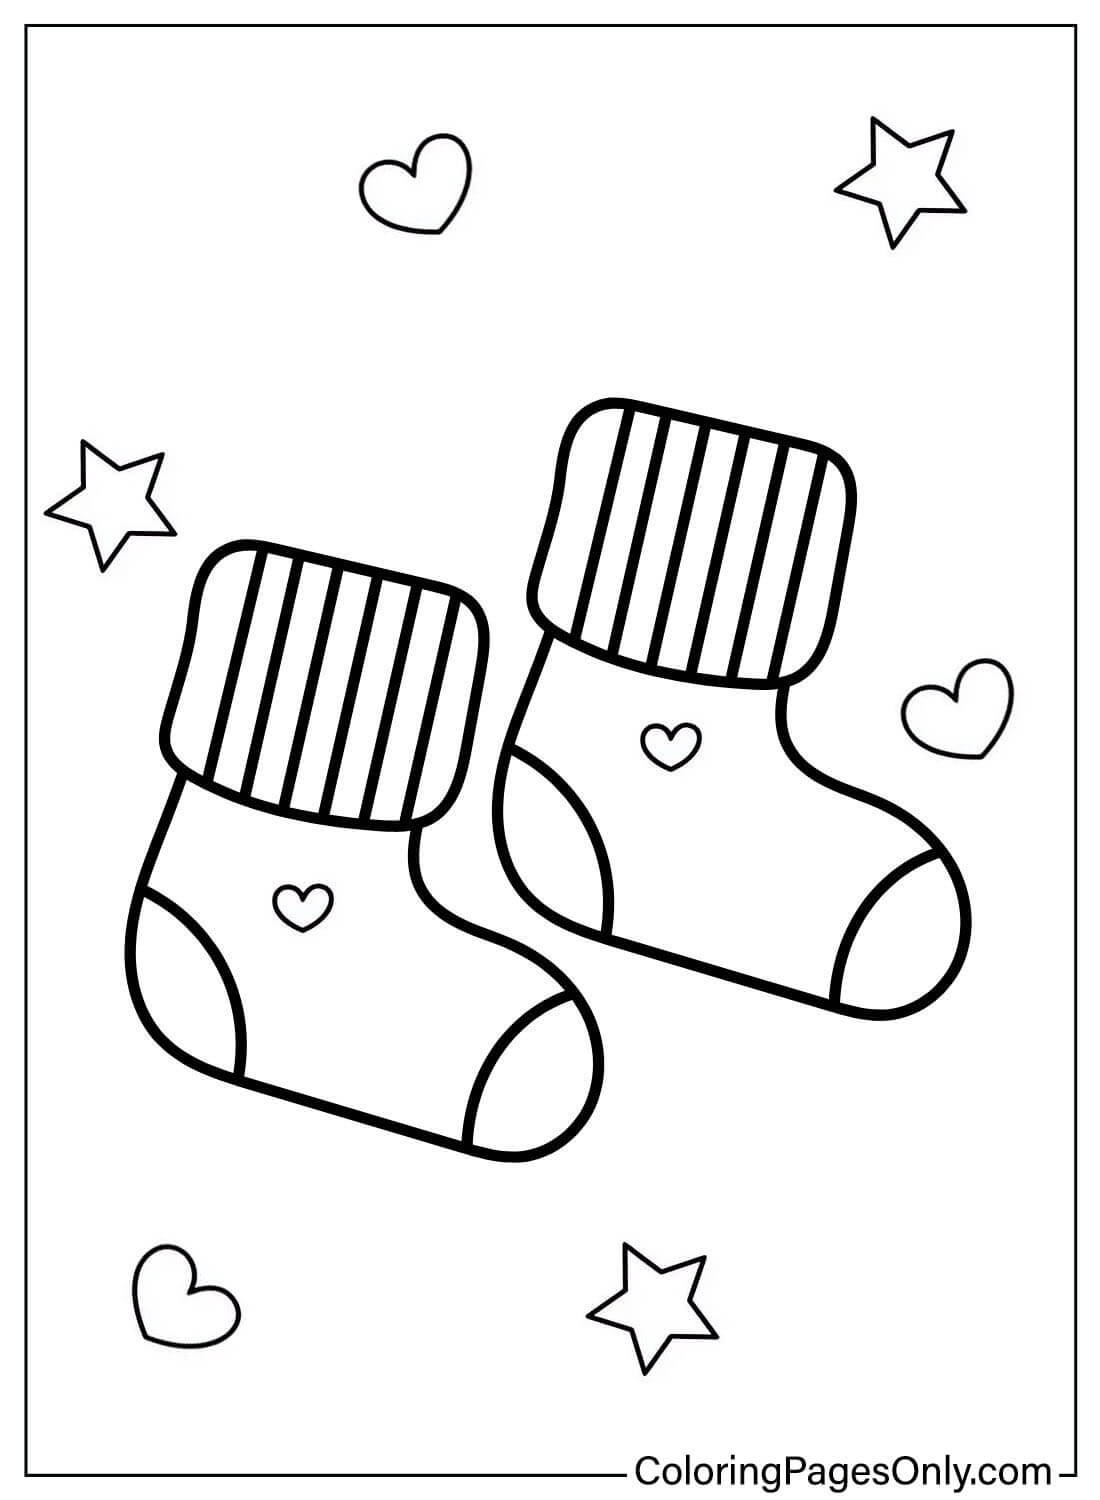 Socks Coloring Page For Kids from Socks